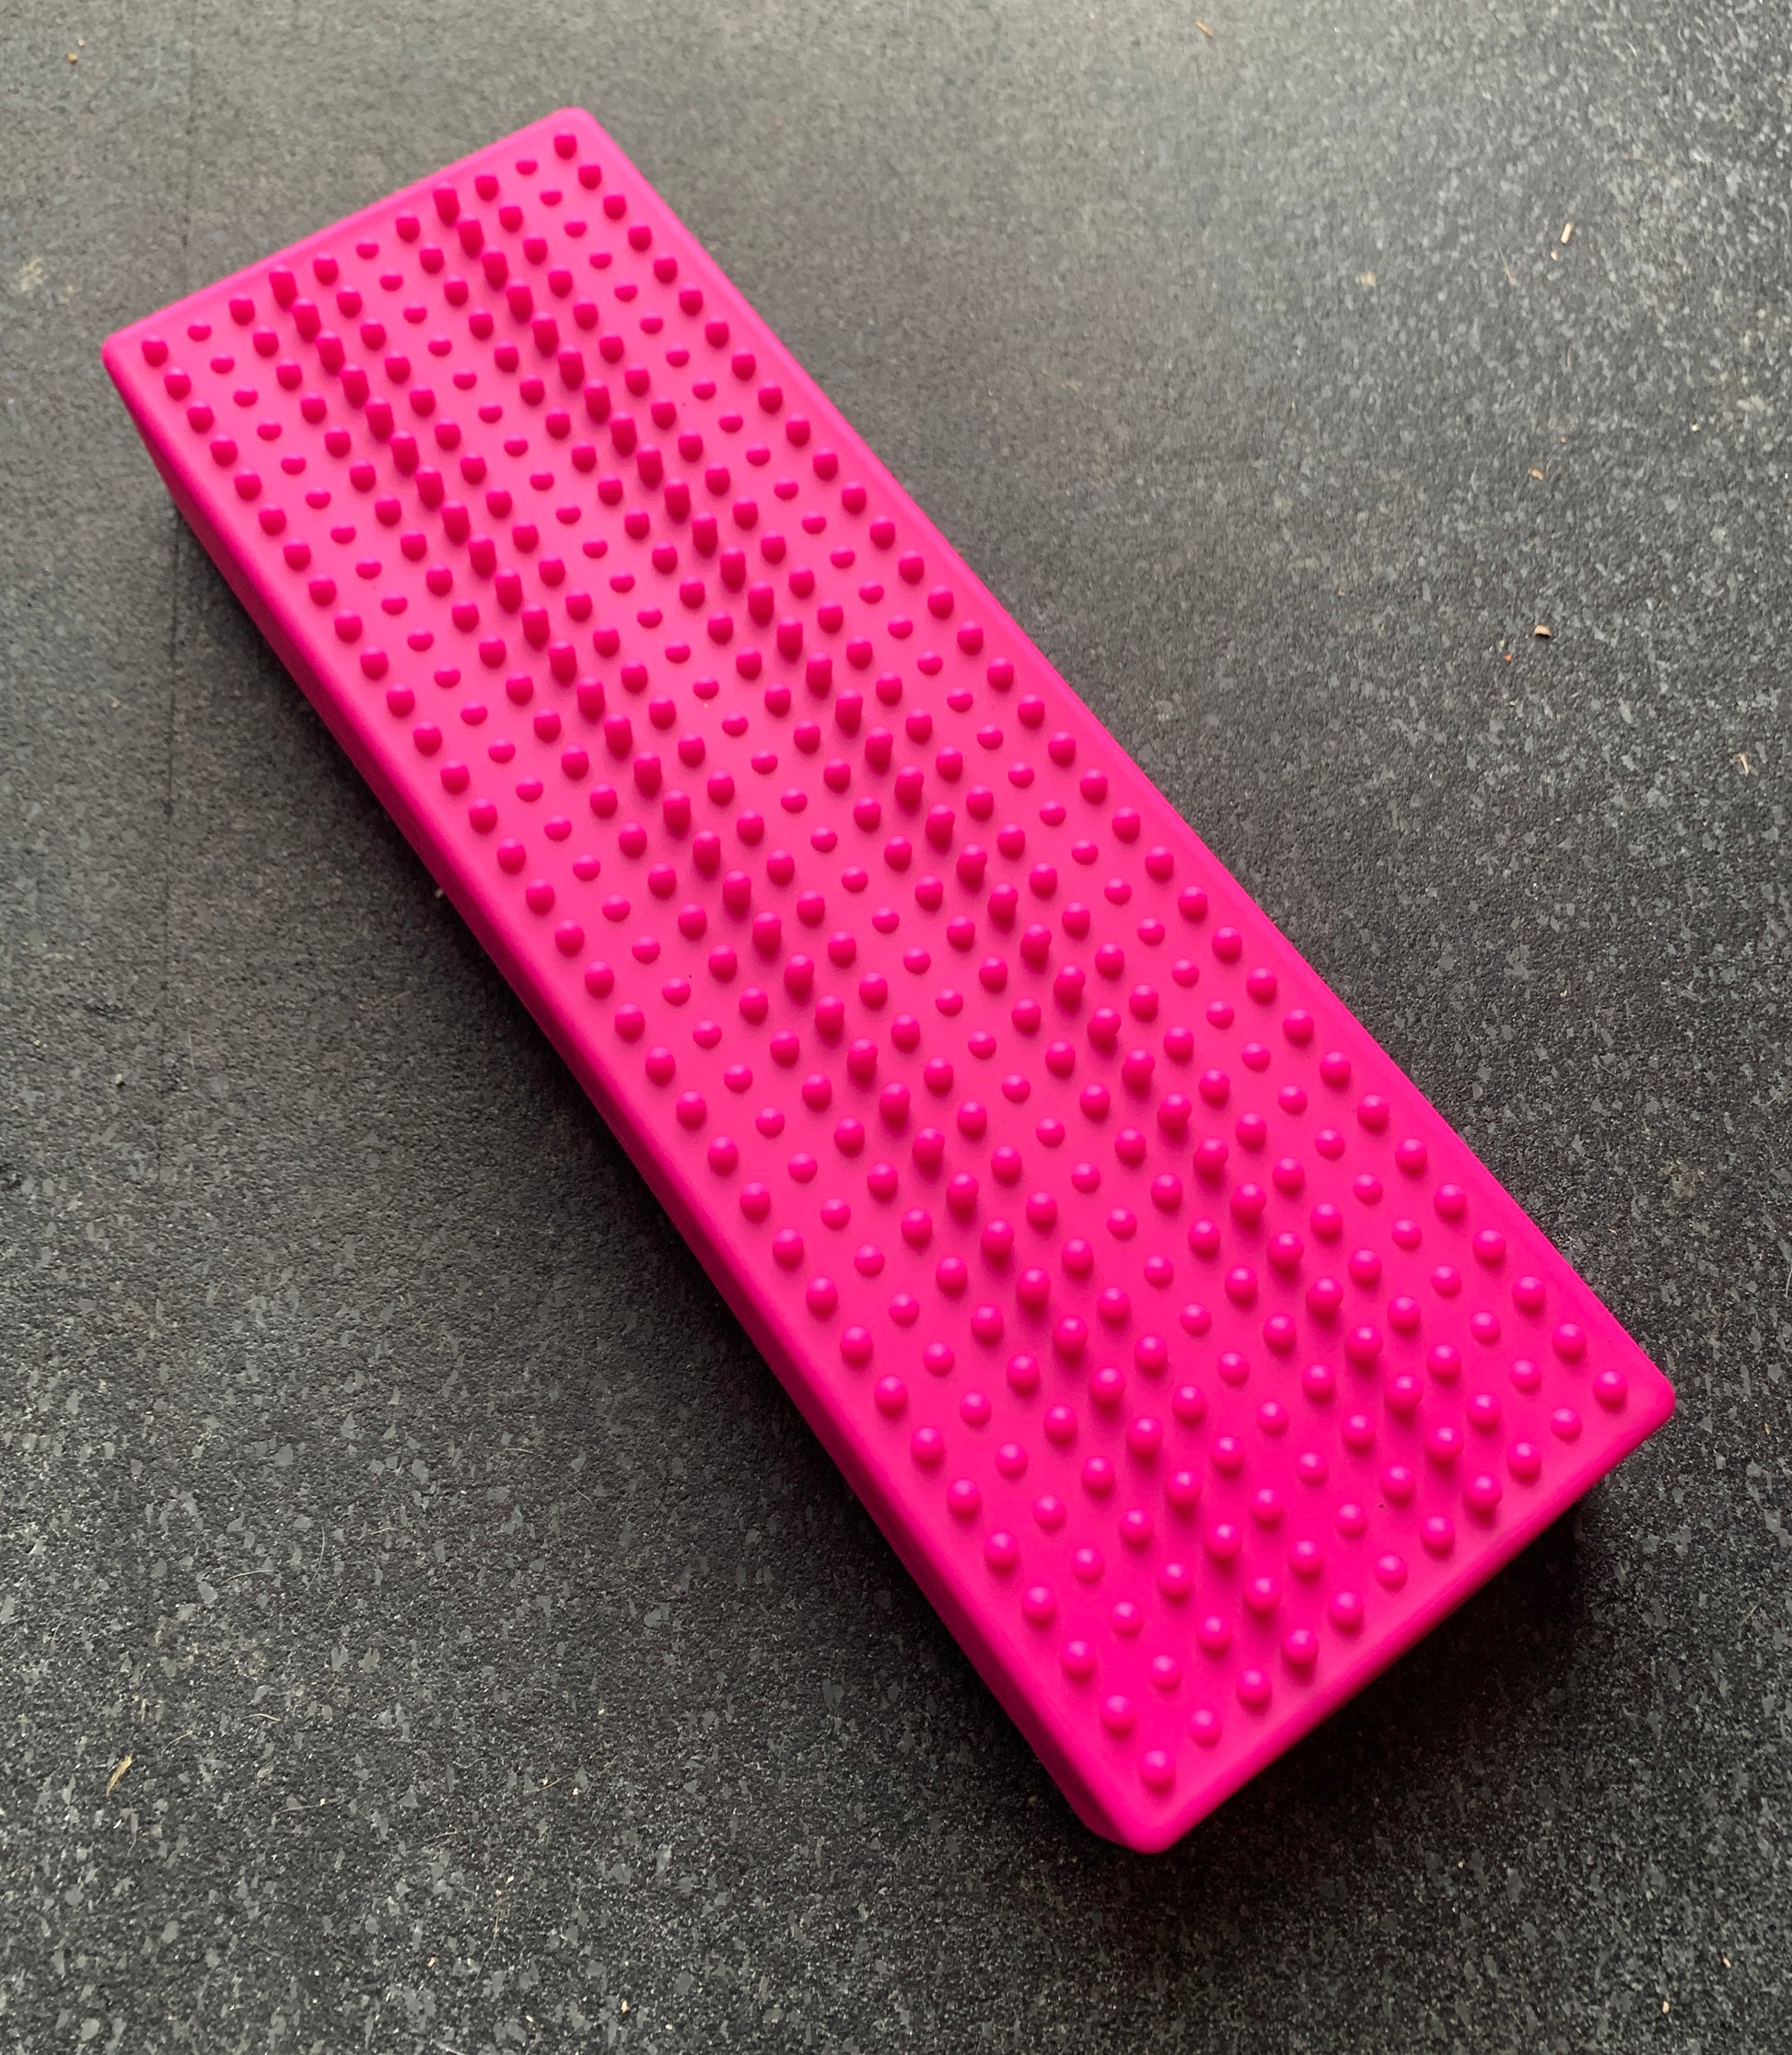 A pink plastic Flexiness StackingBar tray designed with stability levels for small and larger dogs, featuring strategically placed holes, by Your Whole Dog.